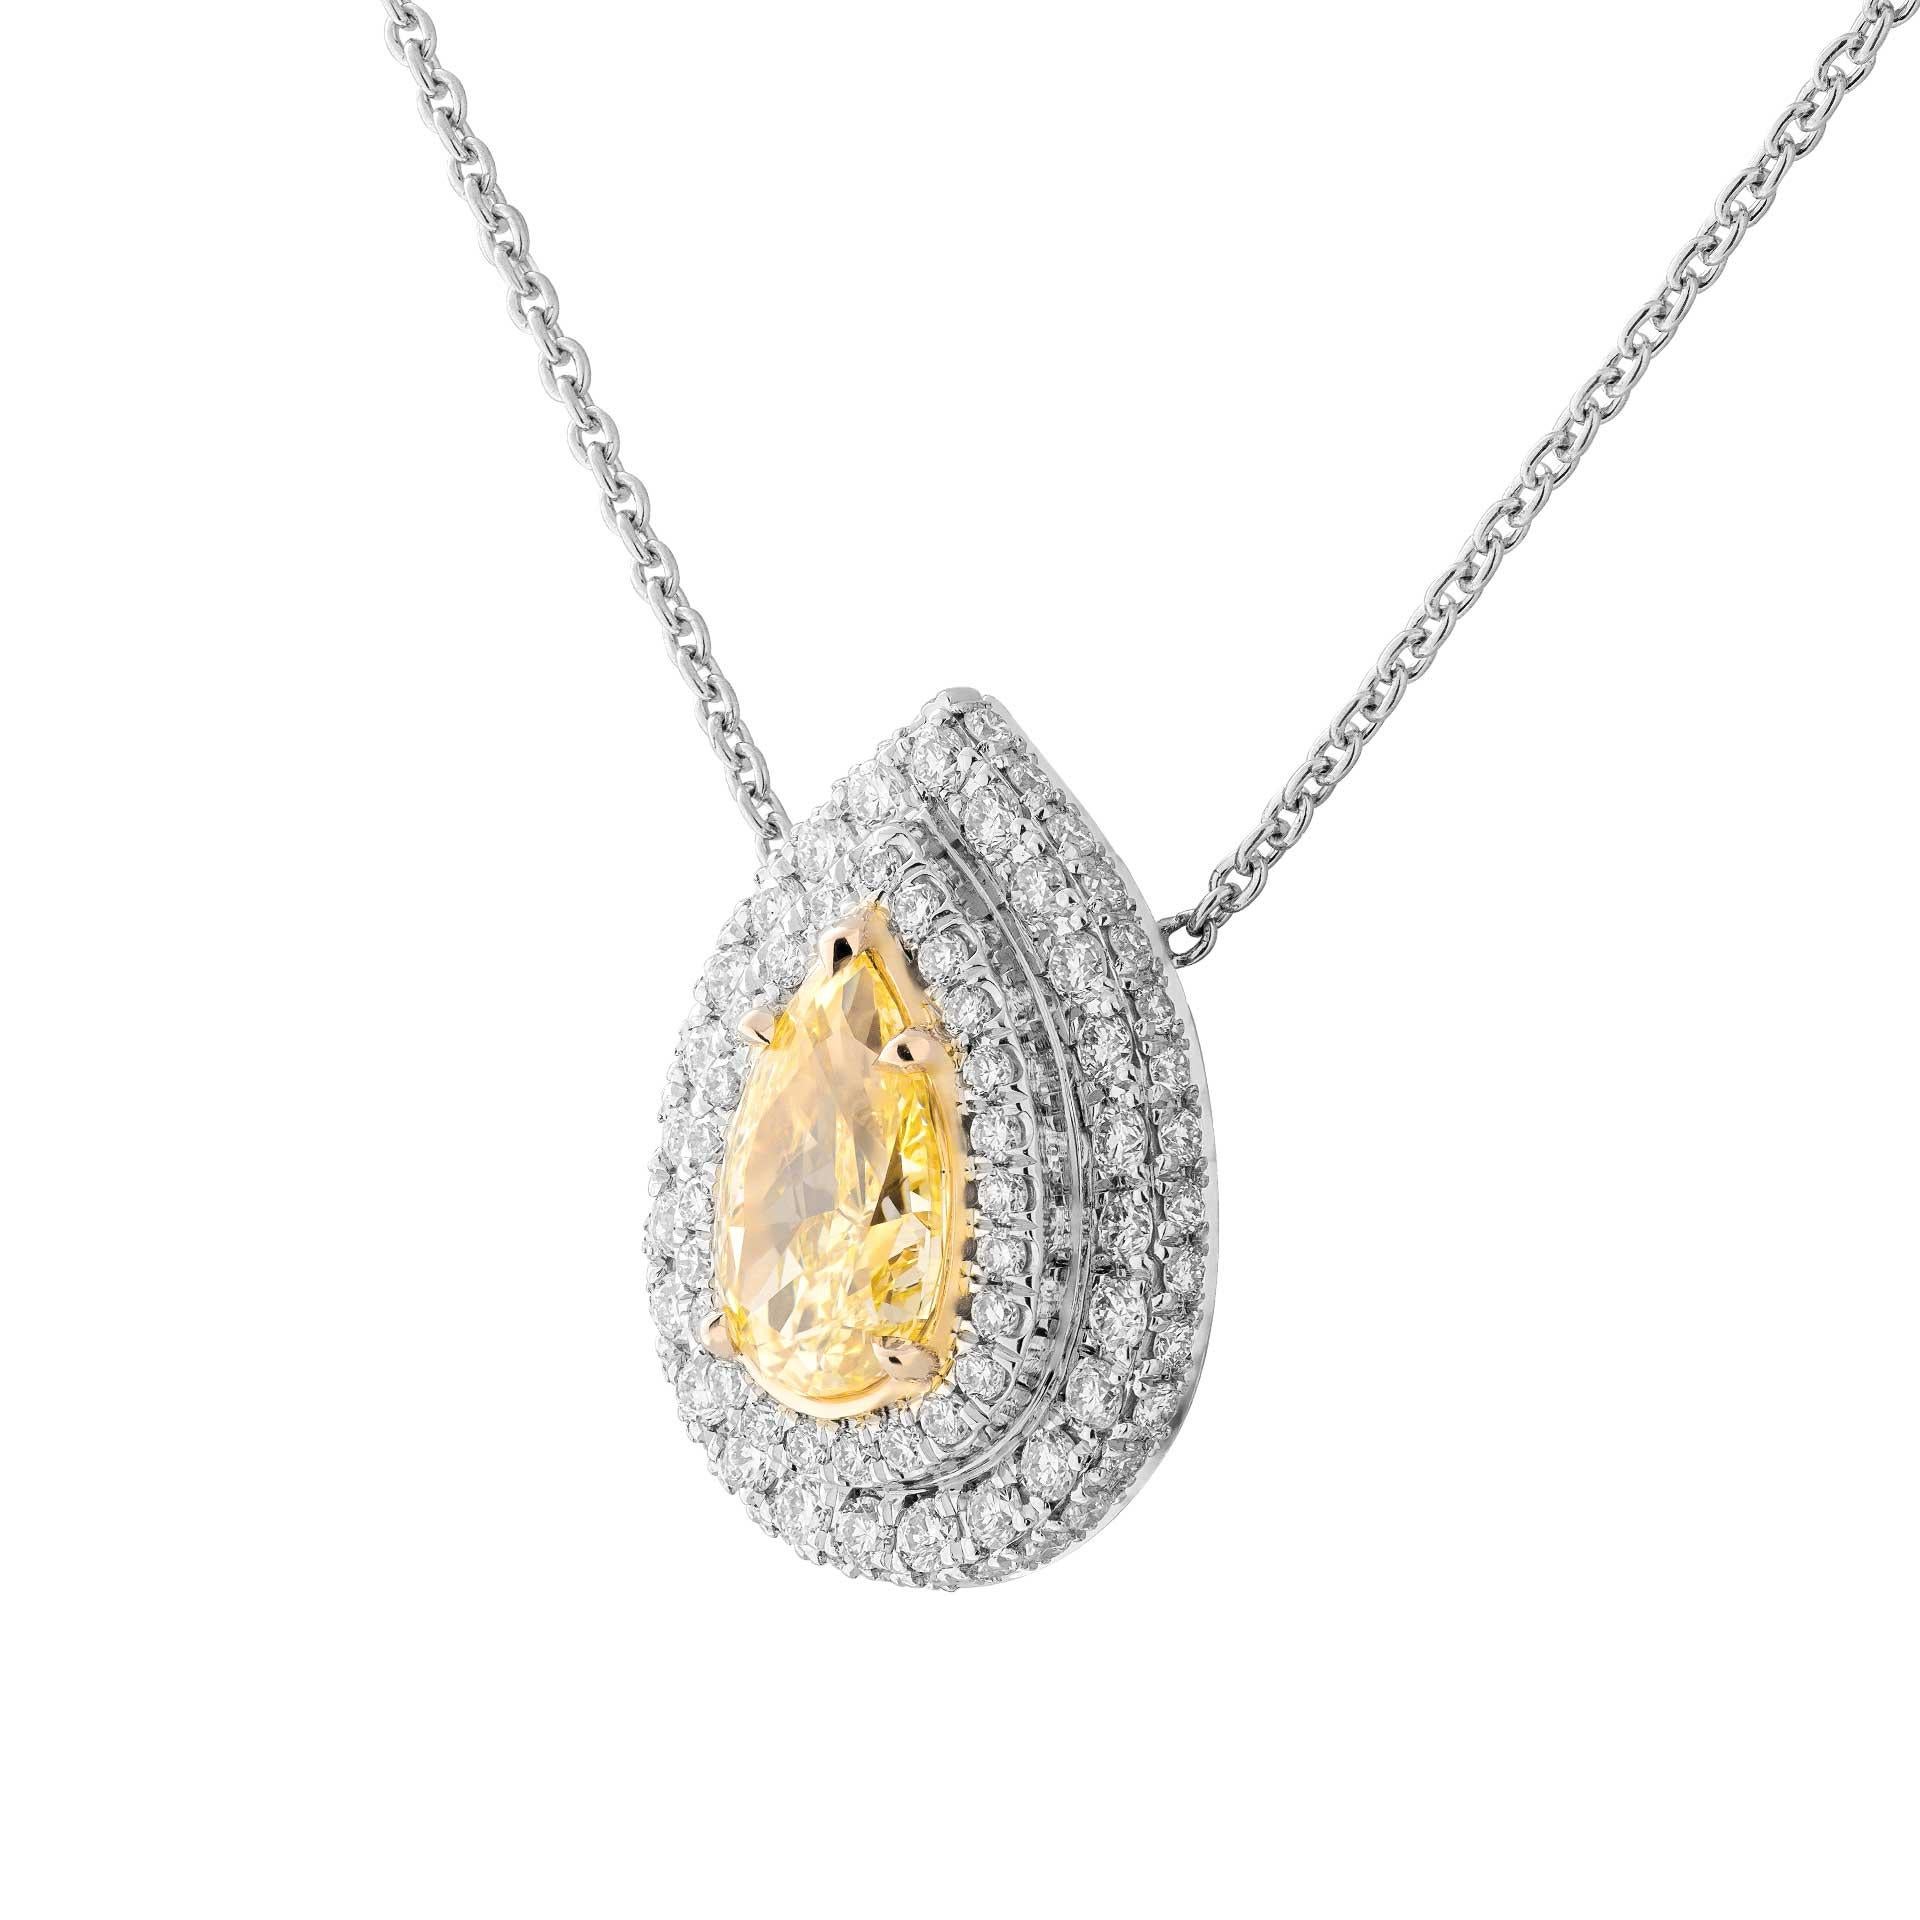 A timeless classic !
Beautiful Fancy Yellow Pear Shape Diamond Pendant with 2 rows of white diamond halo around to highlight the beauty of the stone, totaling 0.5ct of full brilliant cut round diamonds mounted in Platinum950 & 18K Yellow Gold
Center